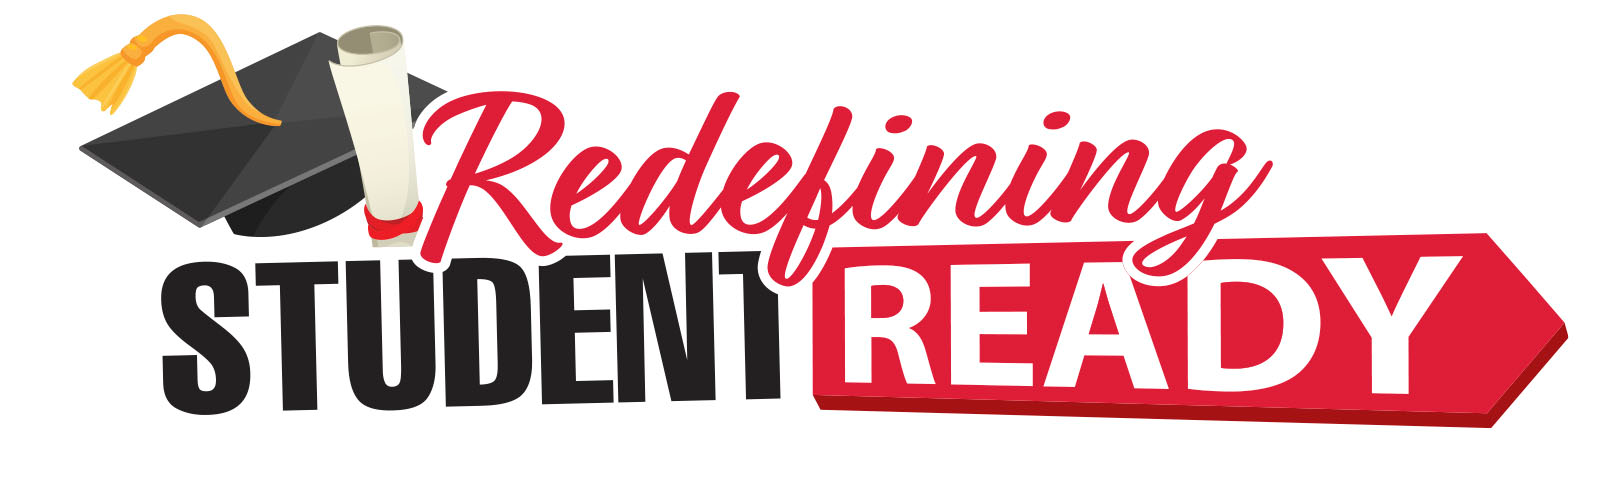 Redefining Student Ready